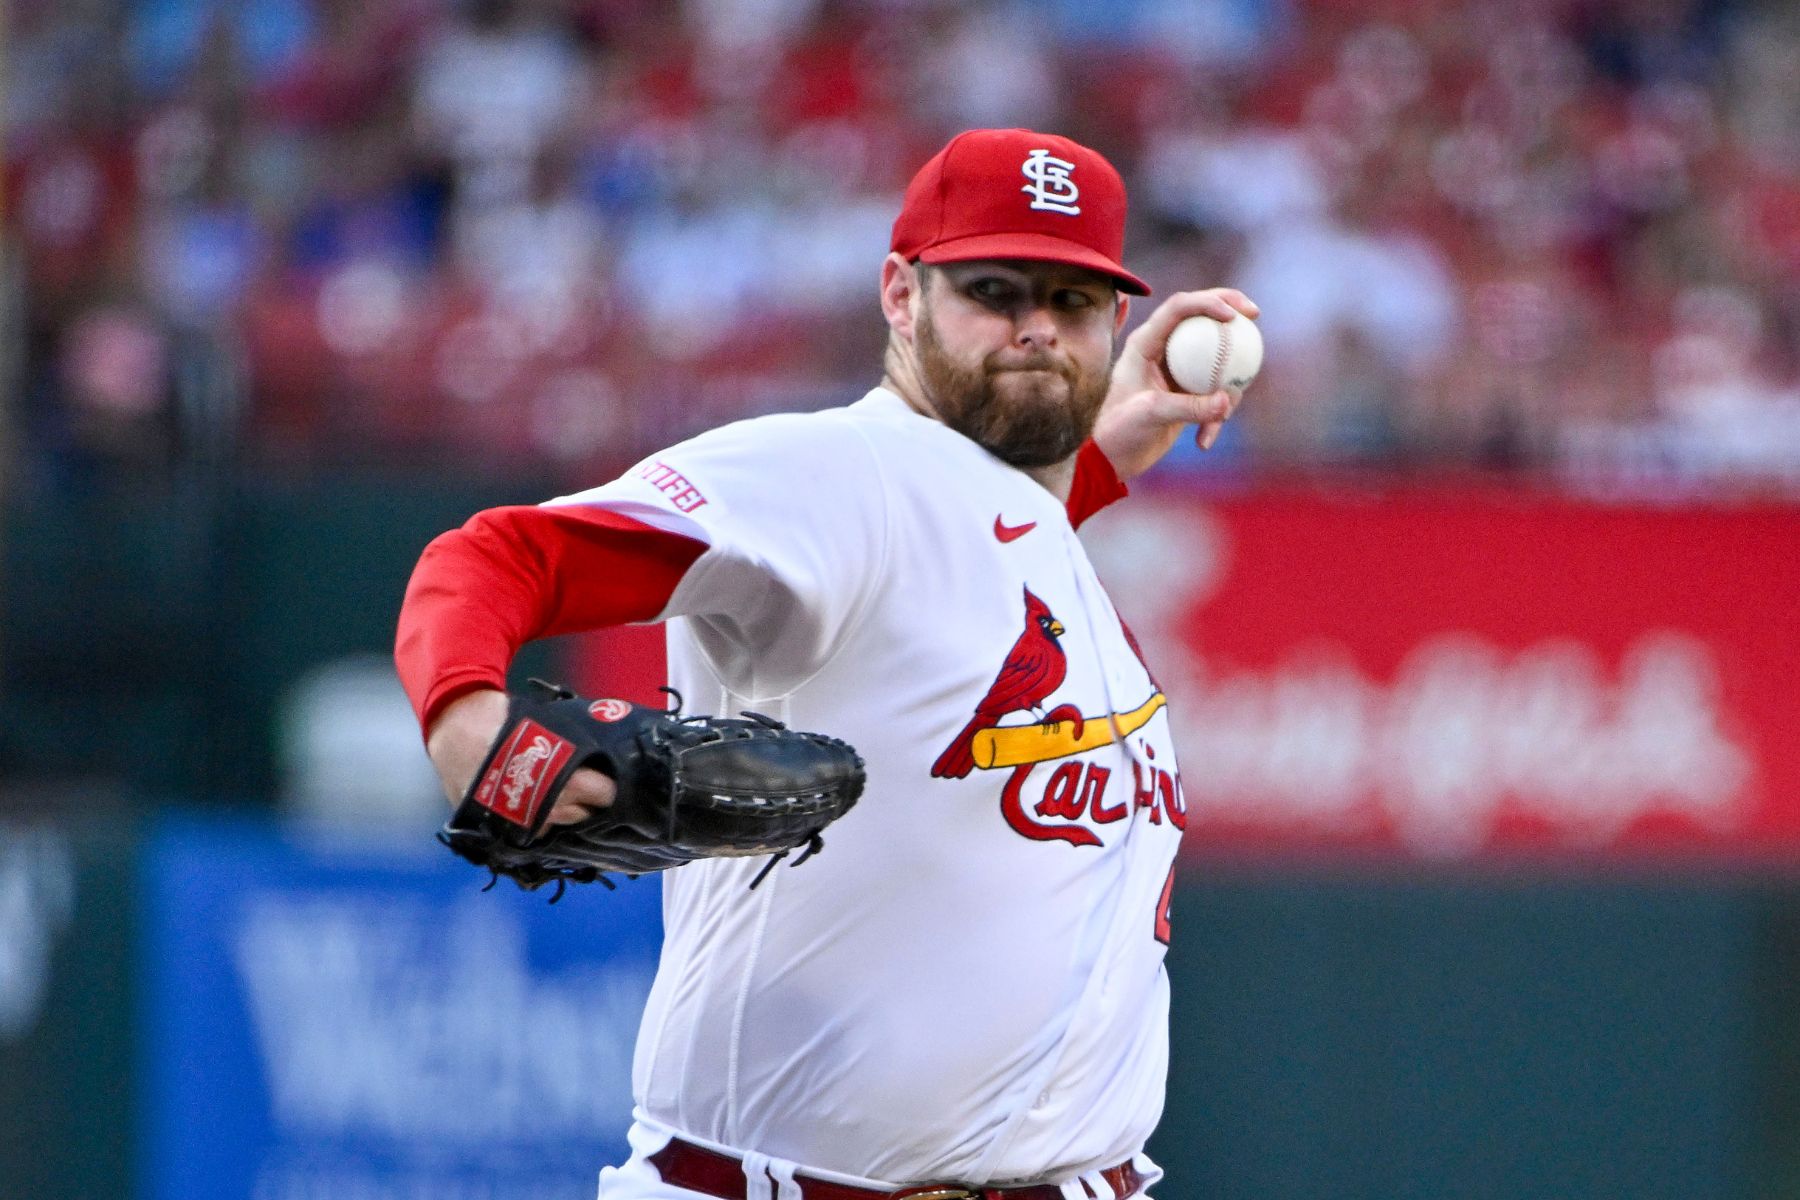 Cardinals trade key pitcher to Blue Jays ahead of 2023 deadline